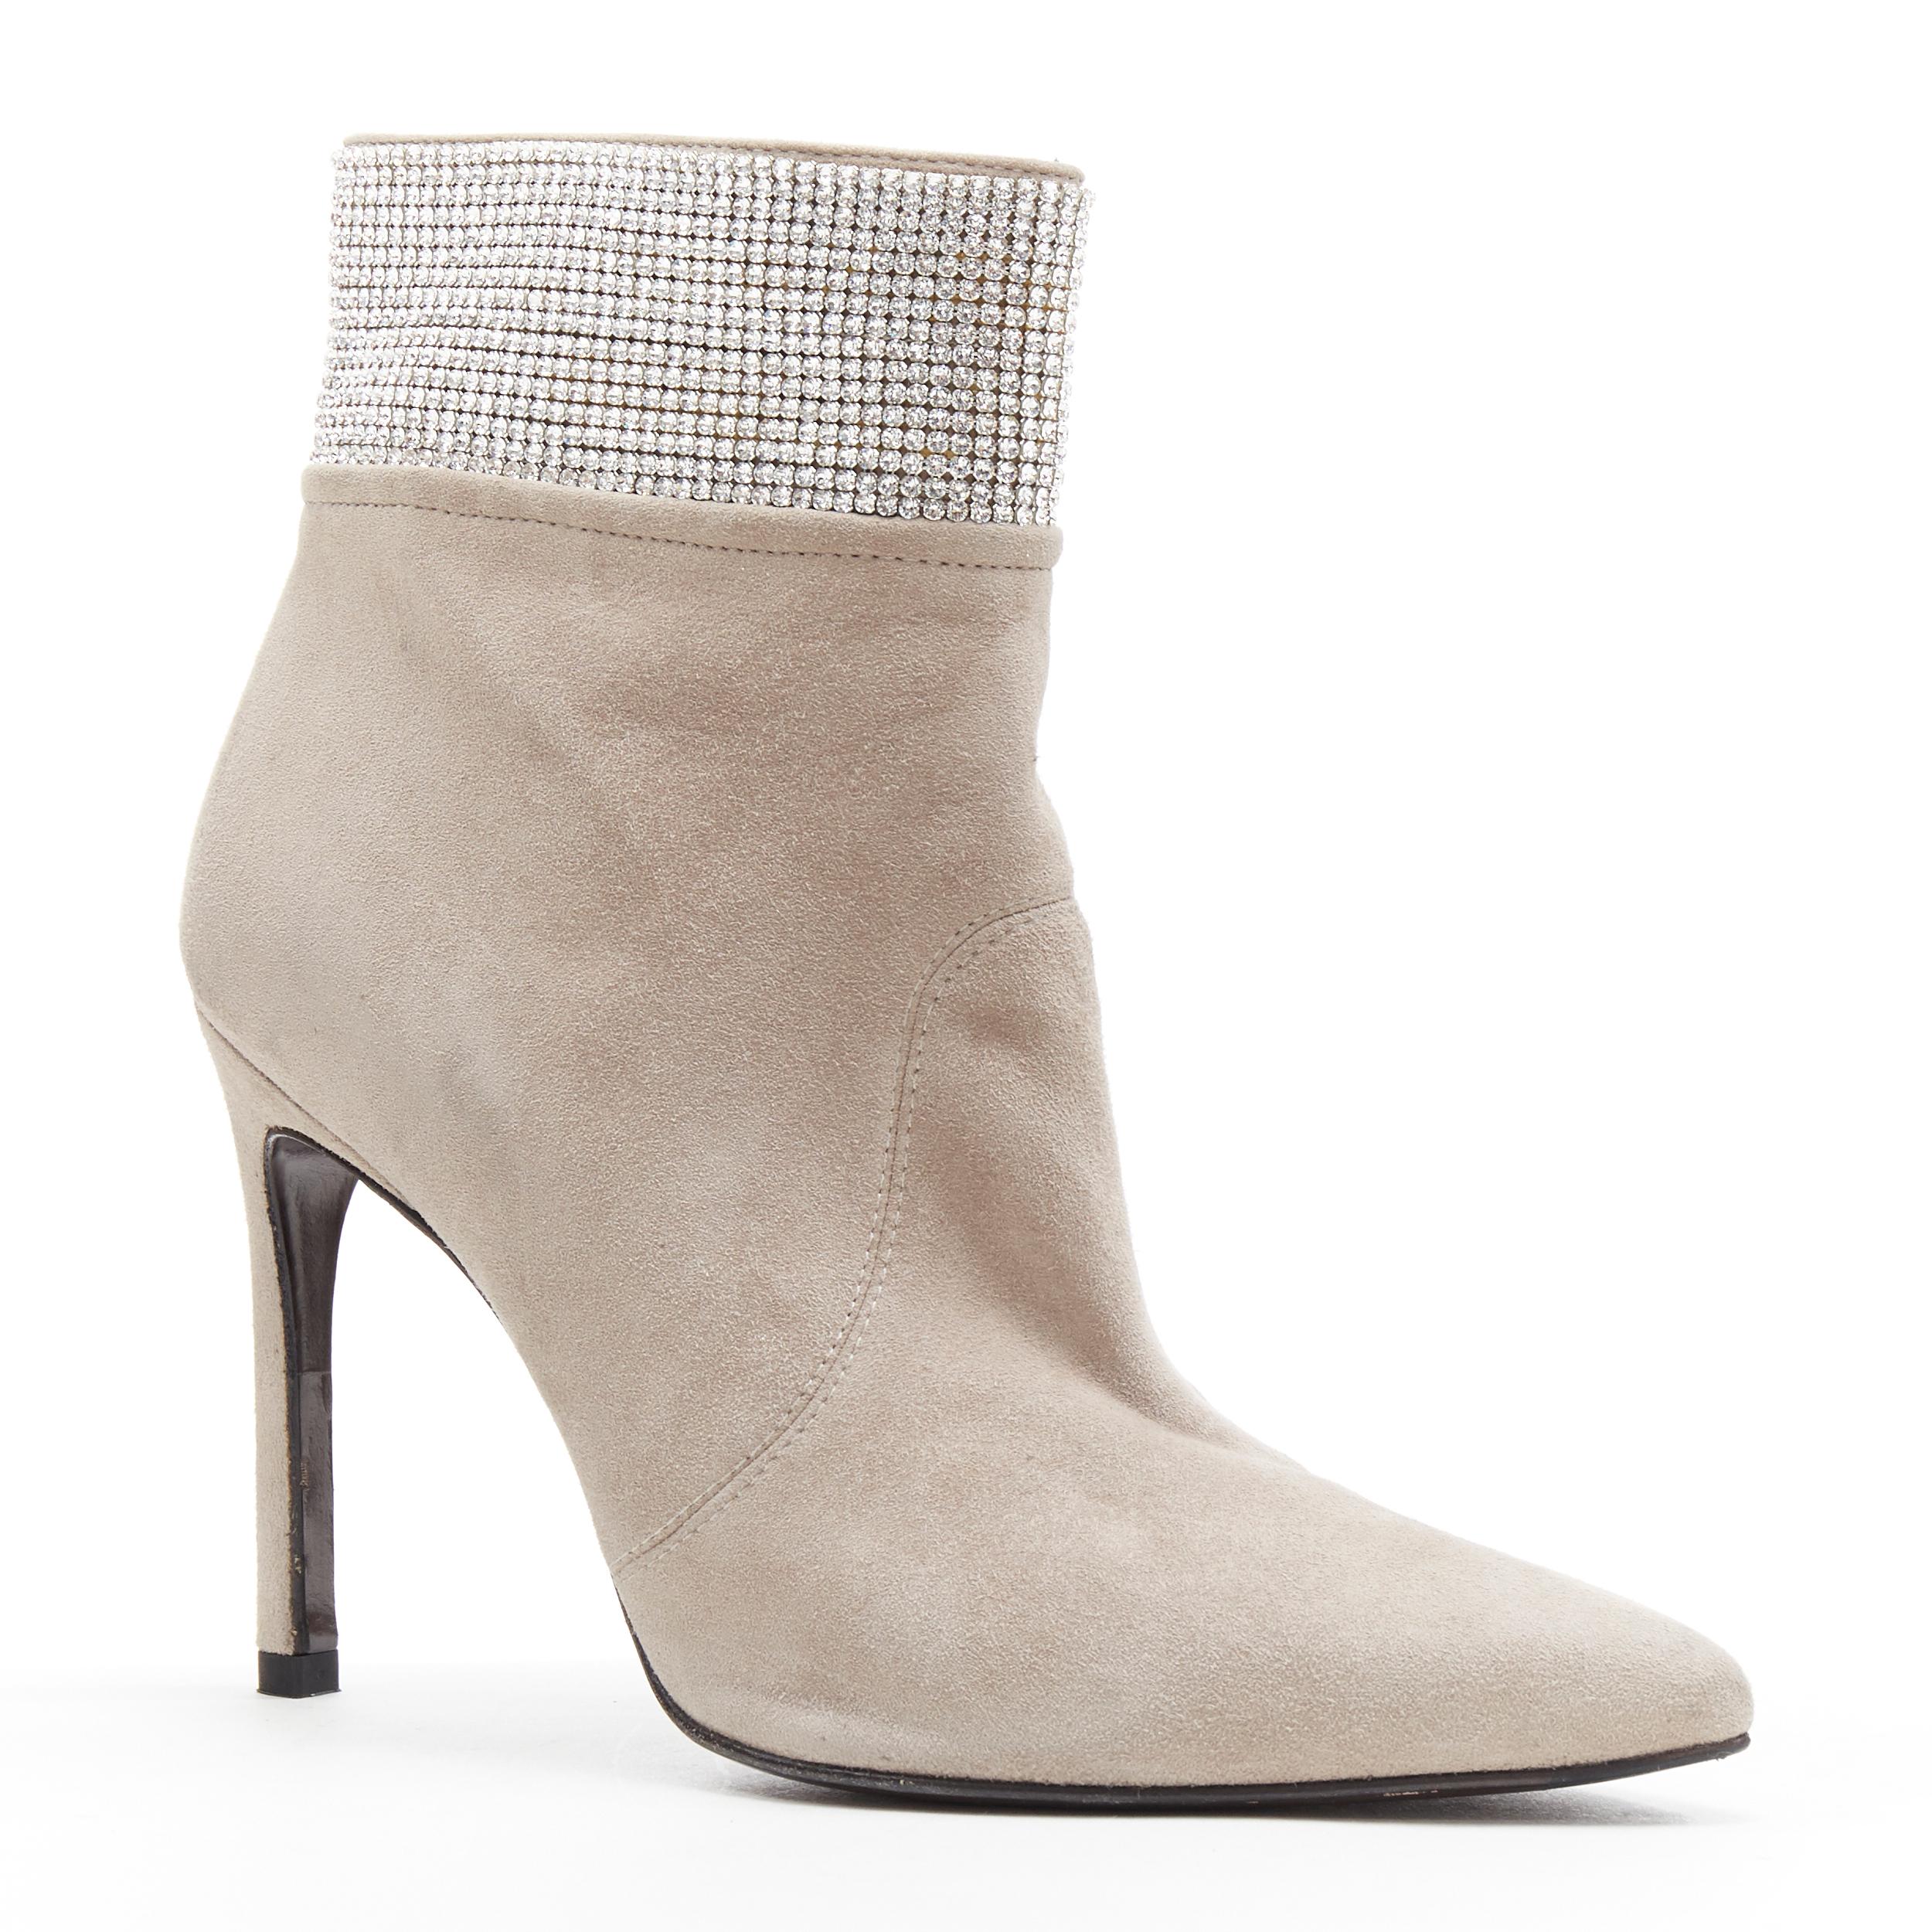 STUART WEITZMAN Highbeams grey fossil suede crystal embellished bootie EU38.5
Brand: Stuart Weitzman
Model Name / Style: Highbeams
Material: Suede
Color: Grey
Pattern: Solid
Closure: Zip
Extra Detail: High (3-3.9 in) heel height. Pointed Toe. Slim